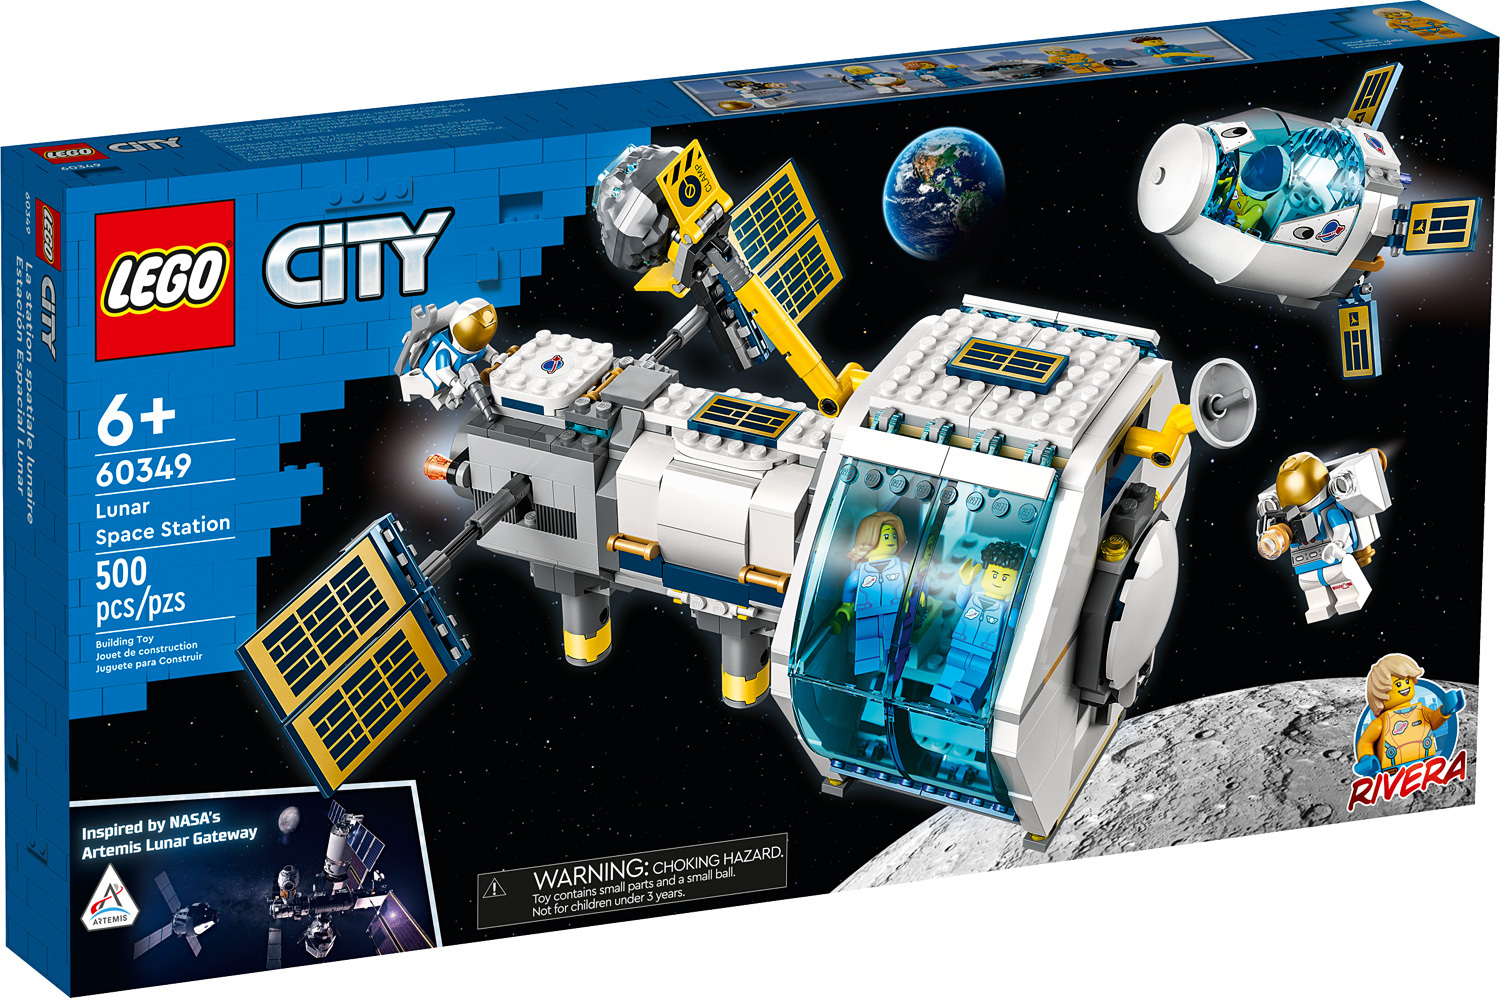 60349 Lunar Space Station - LEGO City - Pickup Only - LEGO